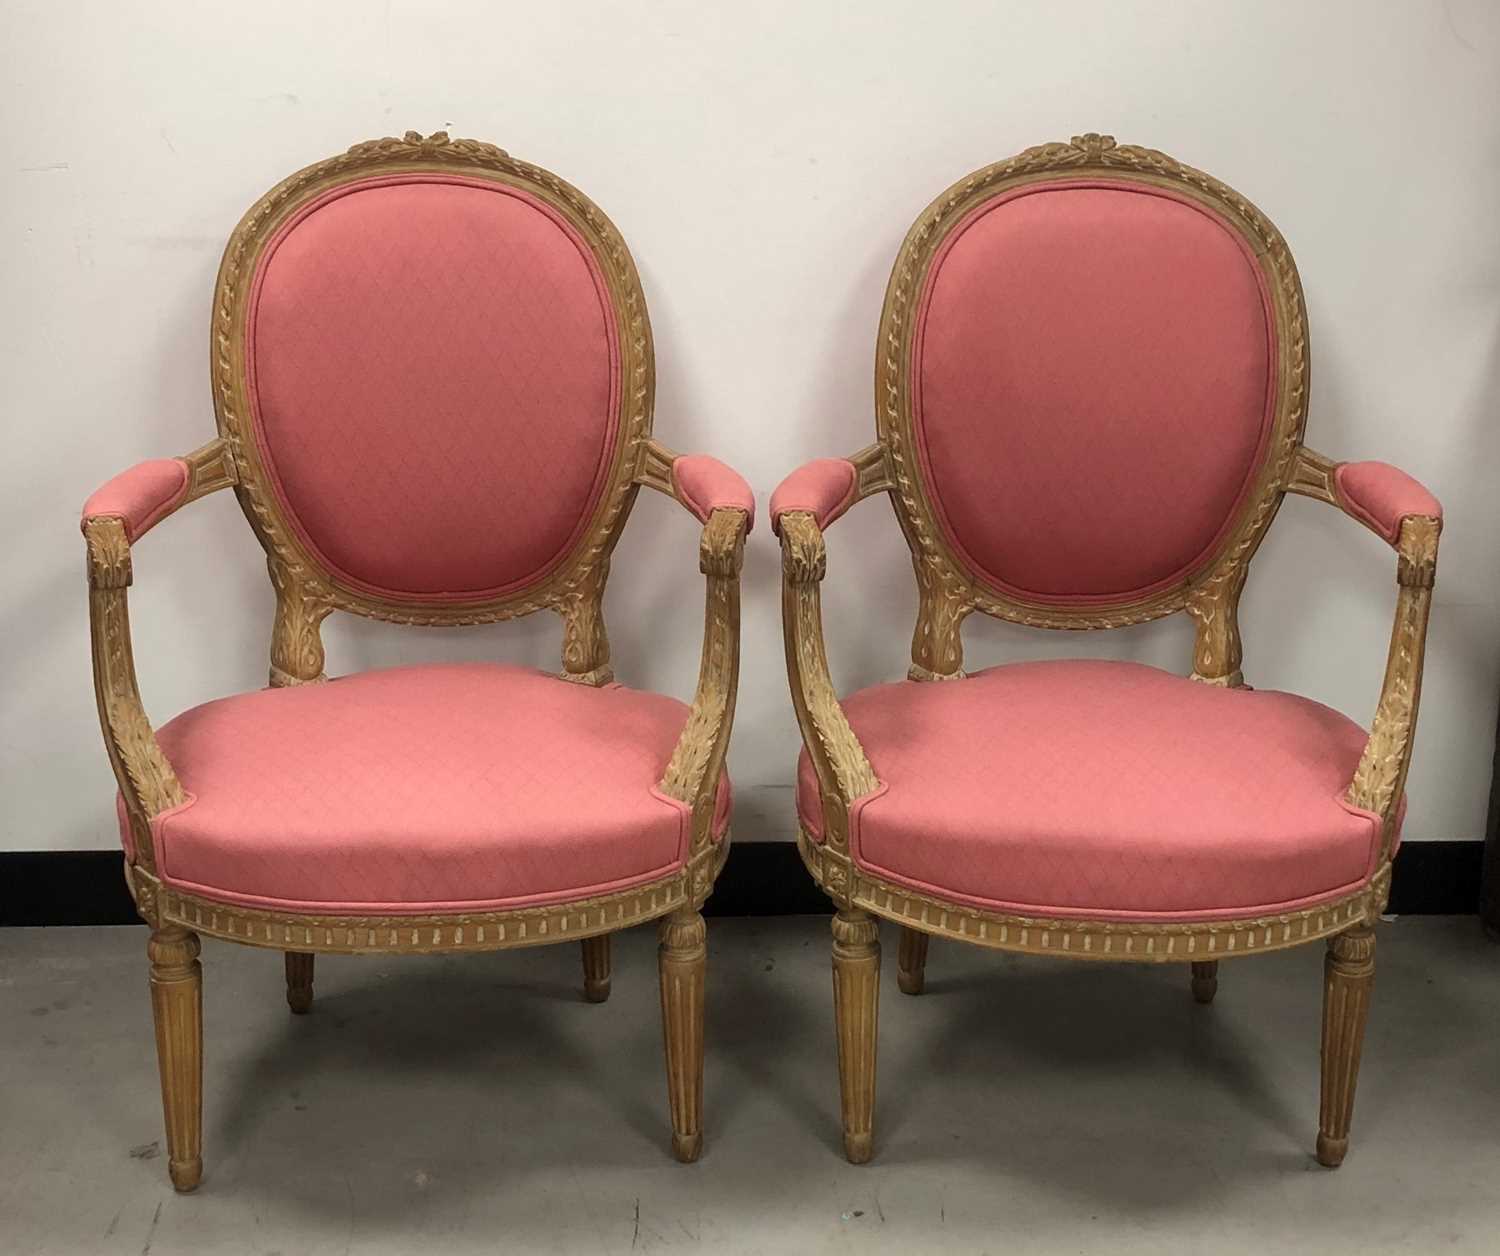 Lot 24 - A pair of French Louis XV style armchairs